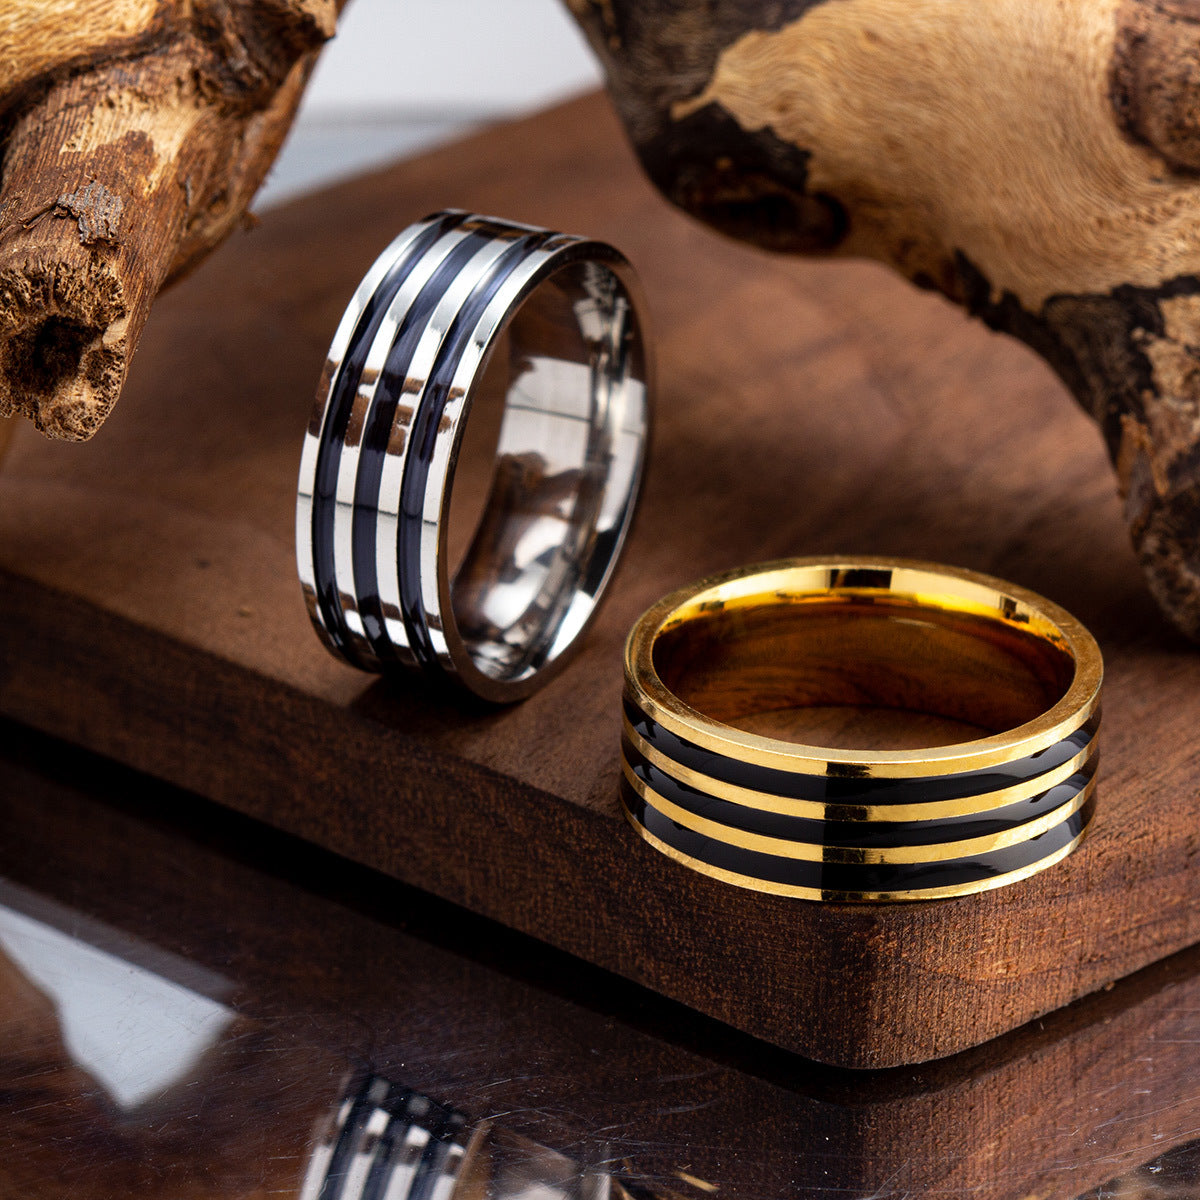 Stainless Steel Men's Drip Oil Ring - Simple Fashion Hand Jewelry